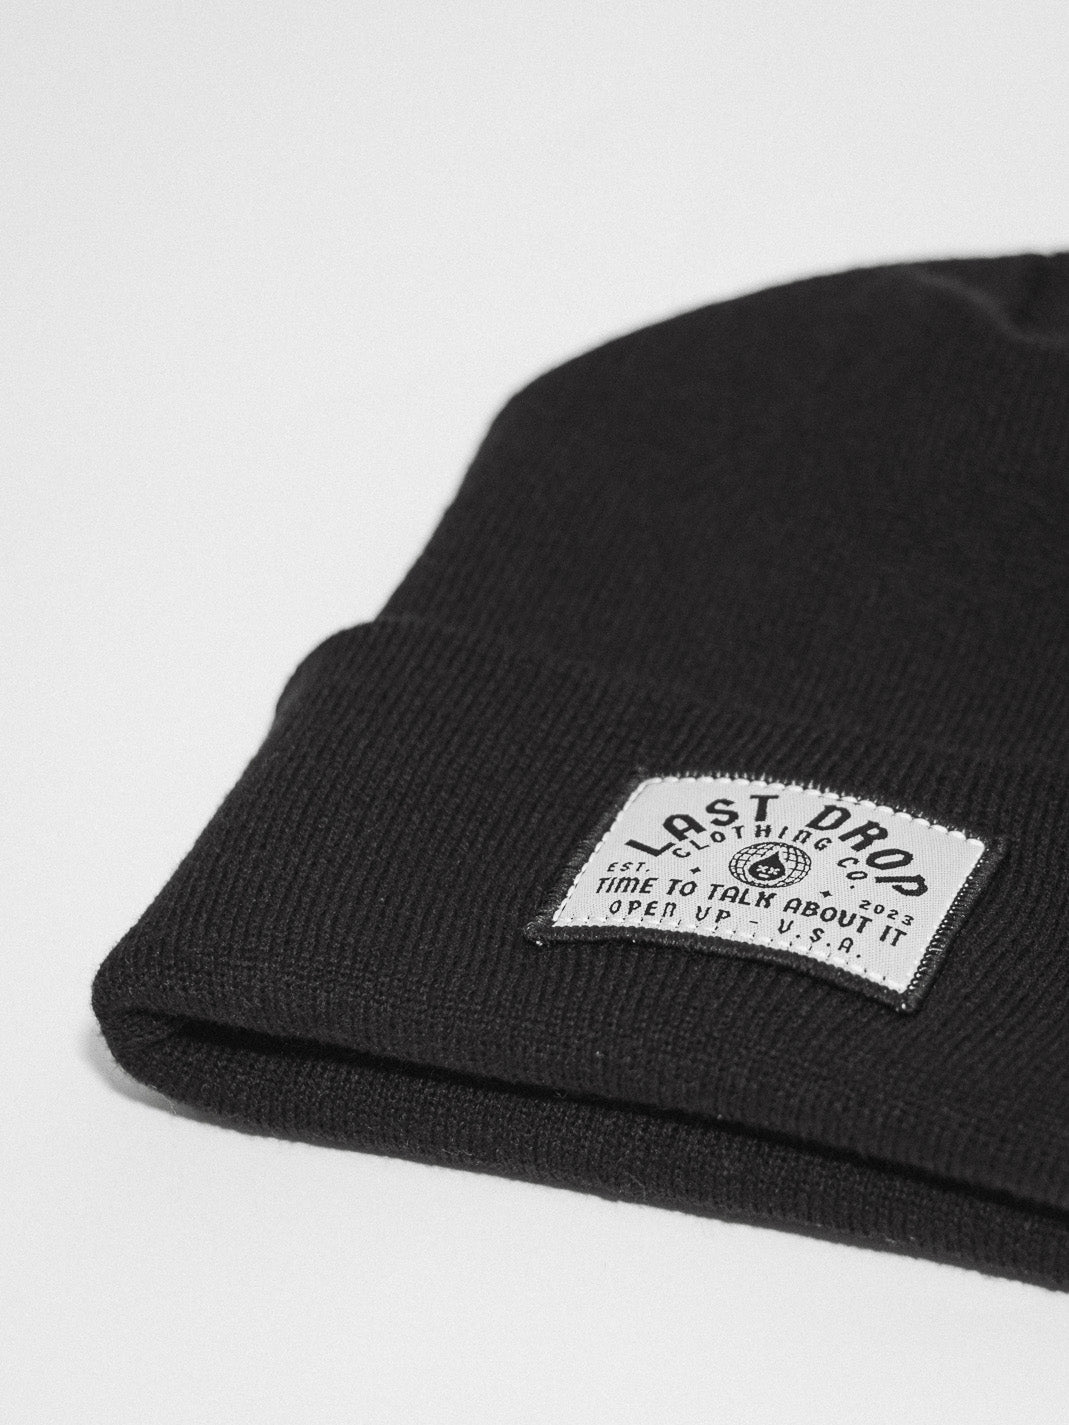 Get ready for the cold weather with this stylish beanie. Made from high-quality materials, this black beanie features an embroidered patch for a unique touch. Stay warm and stay fashionable.